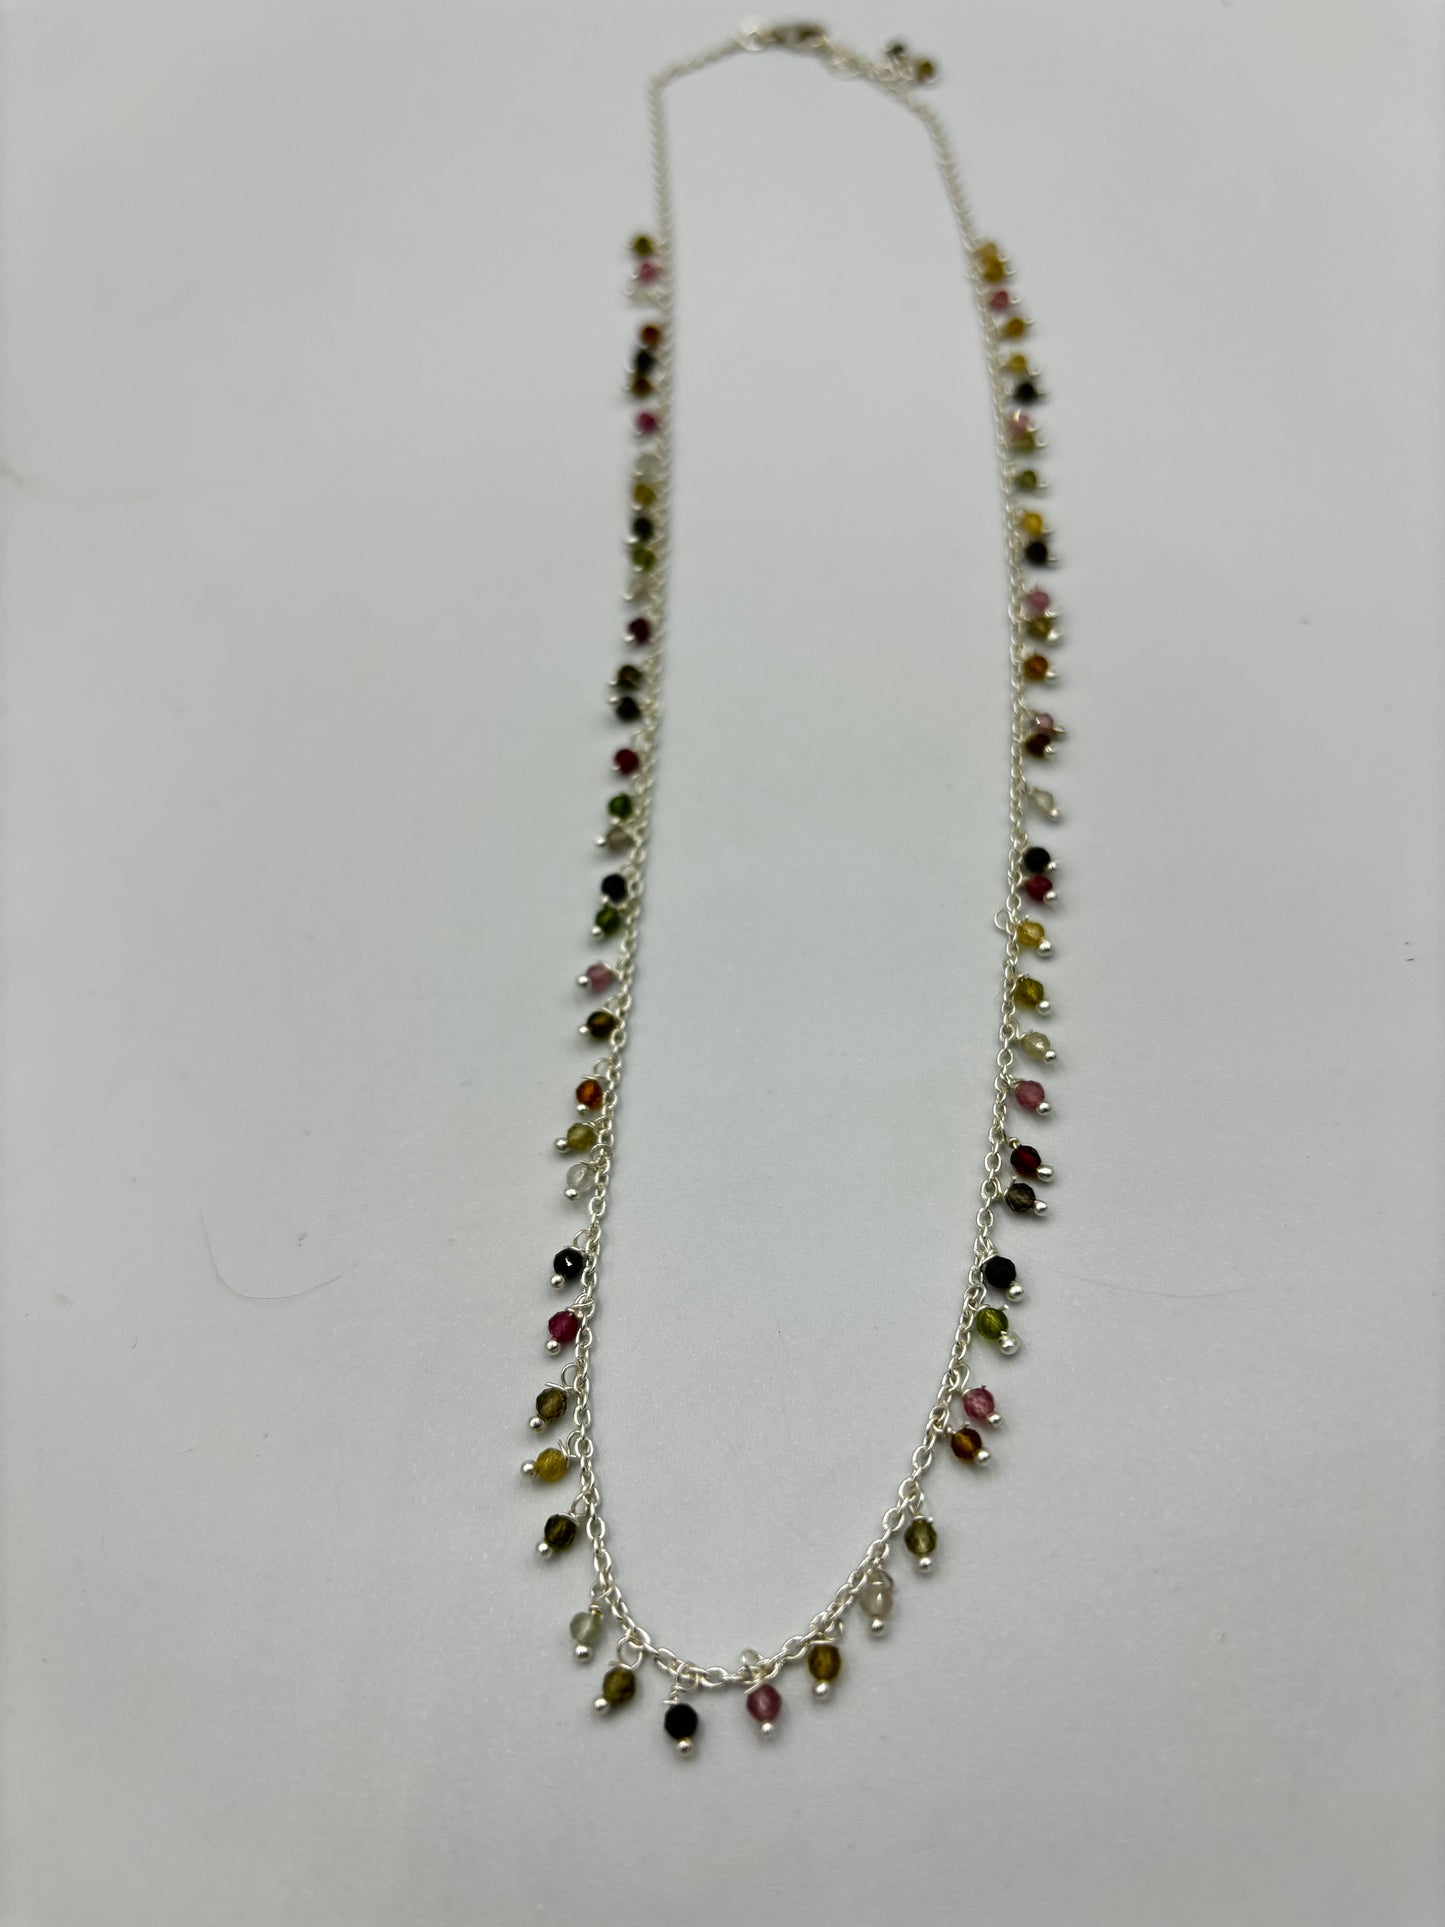 Sterling silver necklace with lots of tourmaline semi precious stones dangling on it